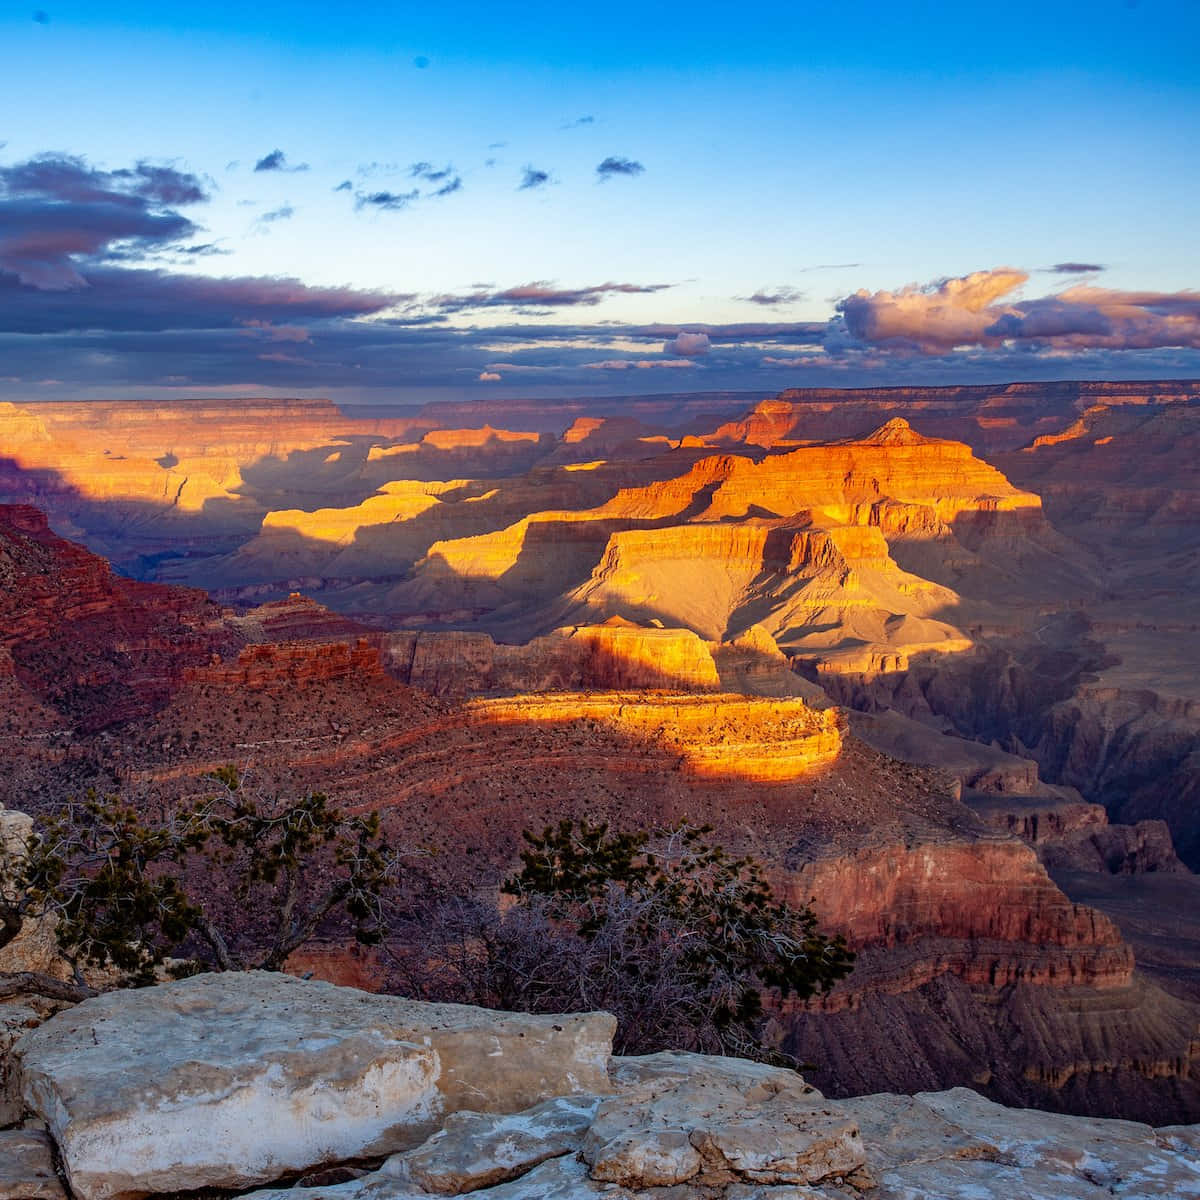 Breathtaking scenery at the Grand Canyon